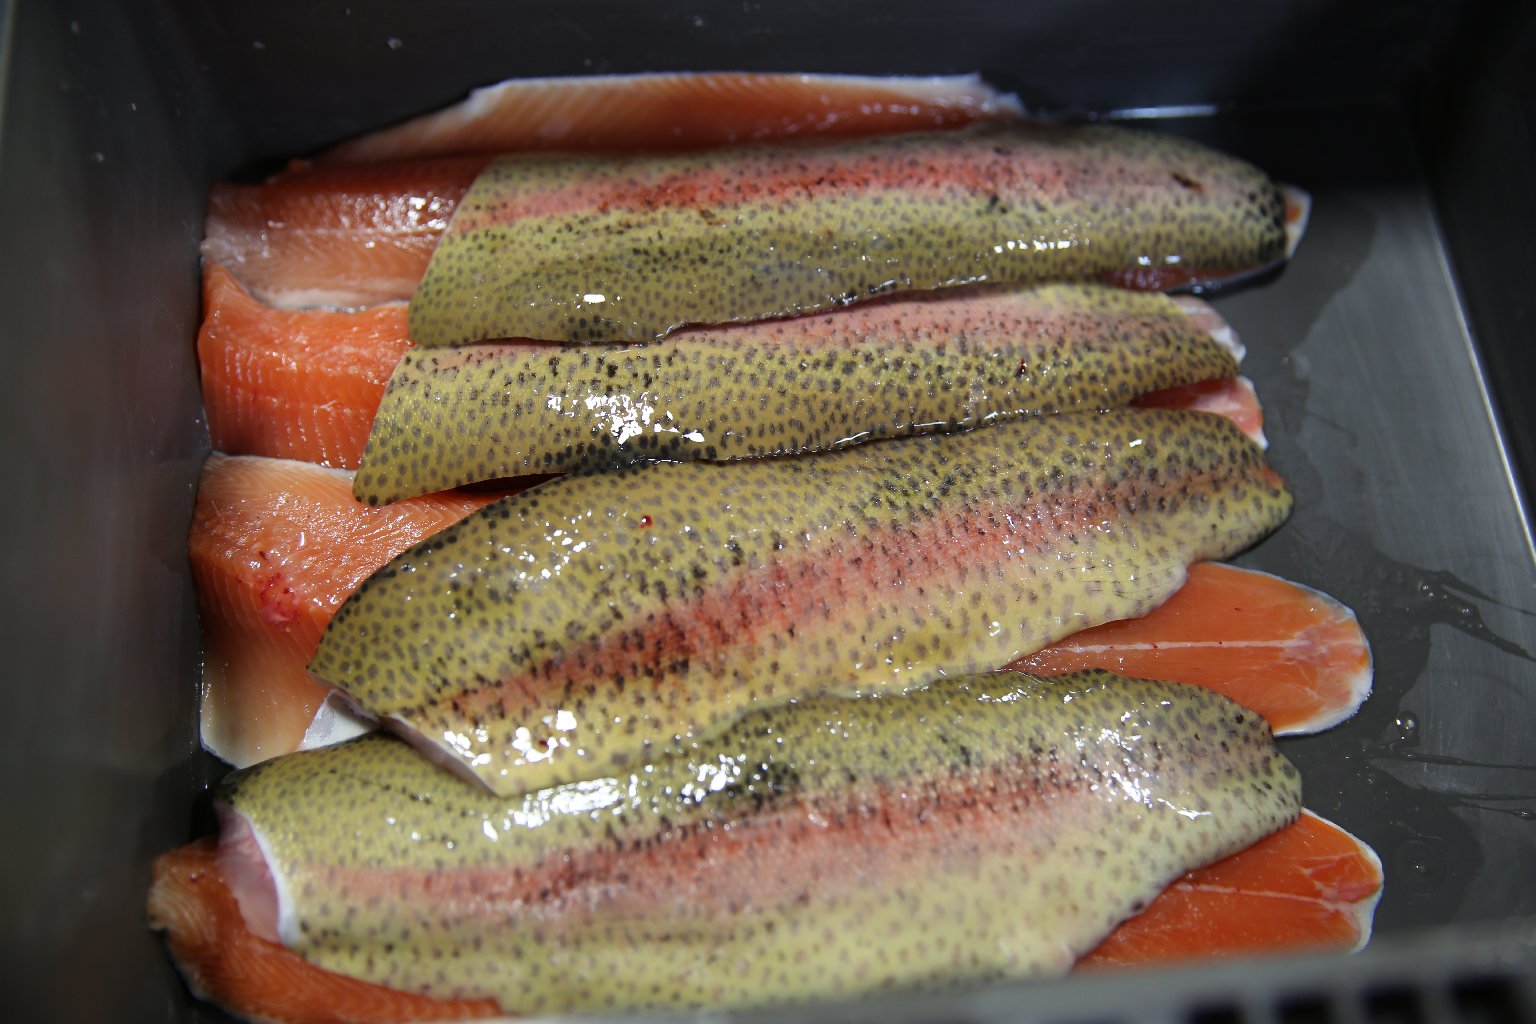 Fillets of TwoXsea's rainbow trout ready for San Francisco restaurants and grocery stores. Lindsey Hoshaw/QUEST.